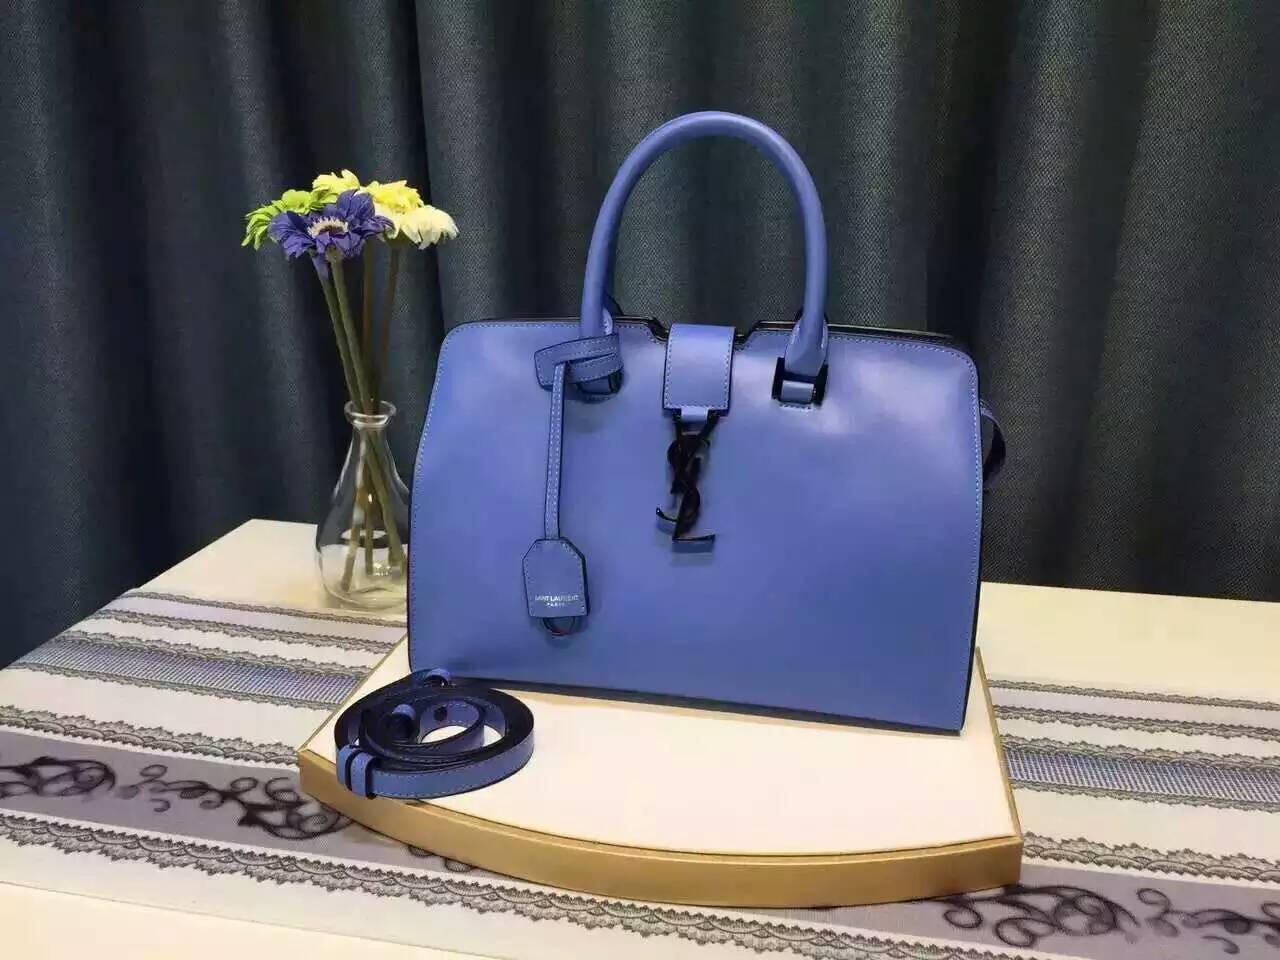 Limited Edition!2016 YSL Collection Outlet-Saint Laurent Small Monogram Cabas Bag in Royal Blue Leather